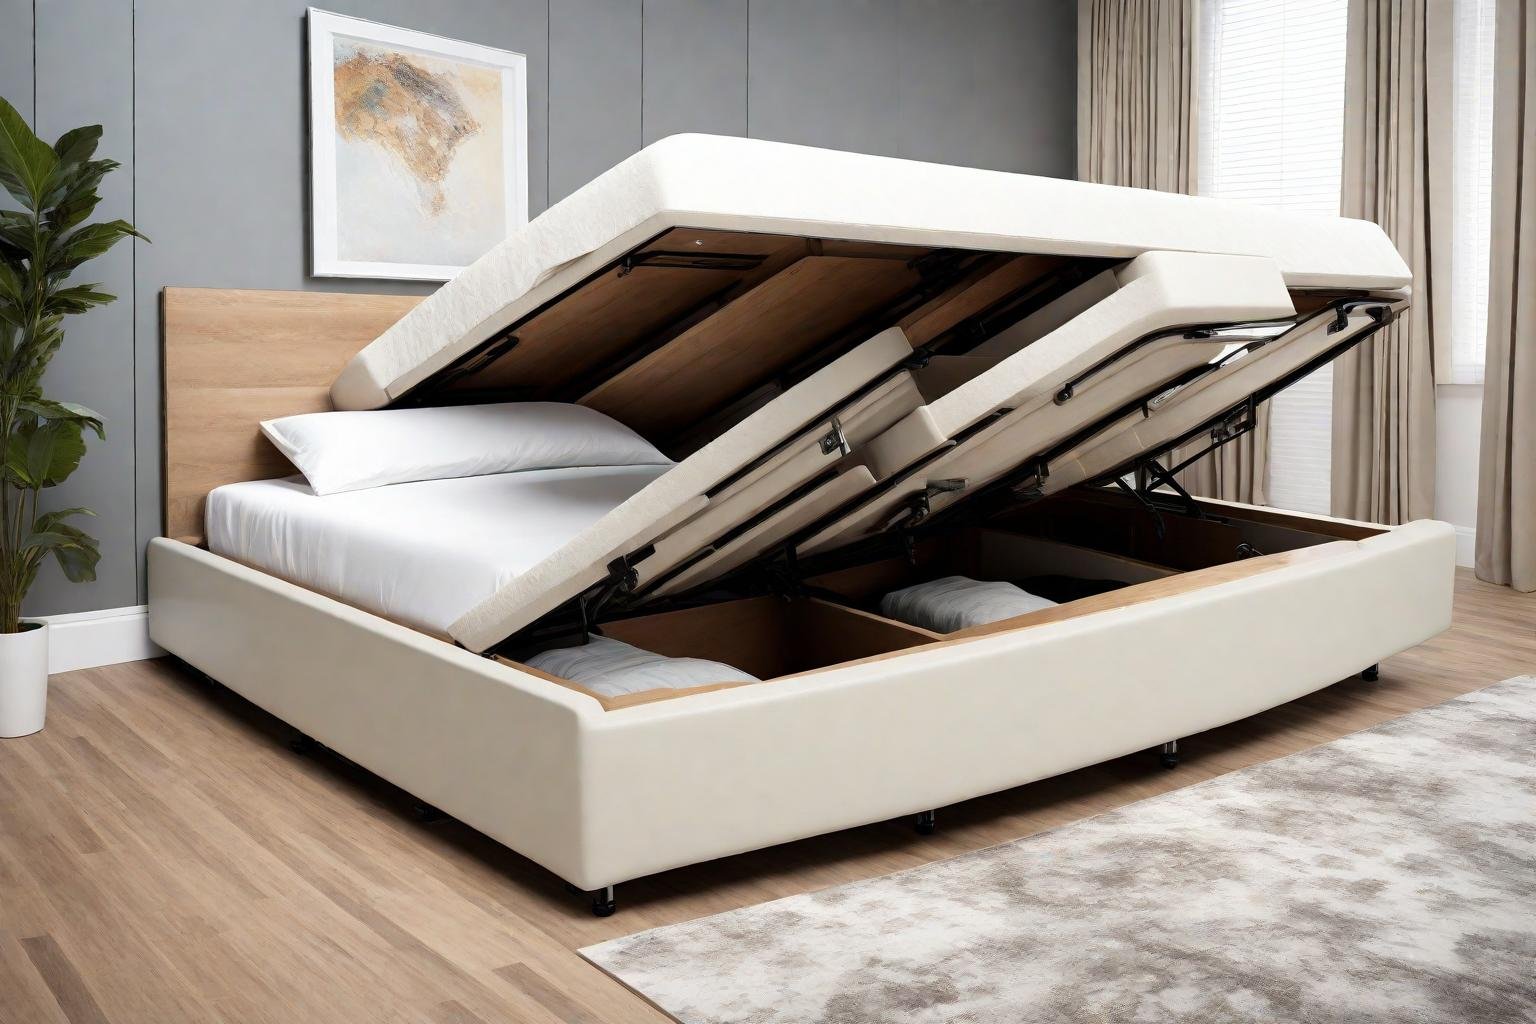 The Benefits of Lift-Up Storage Beds